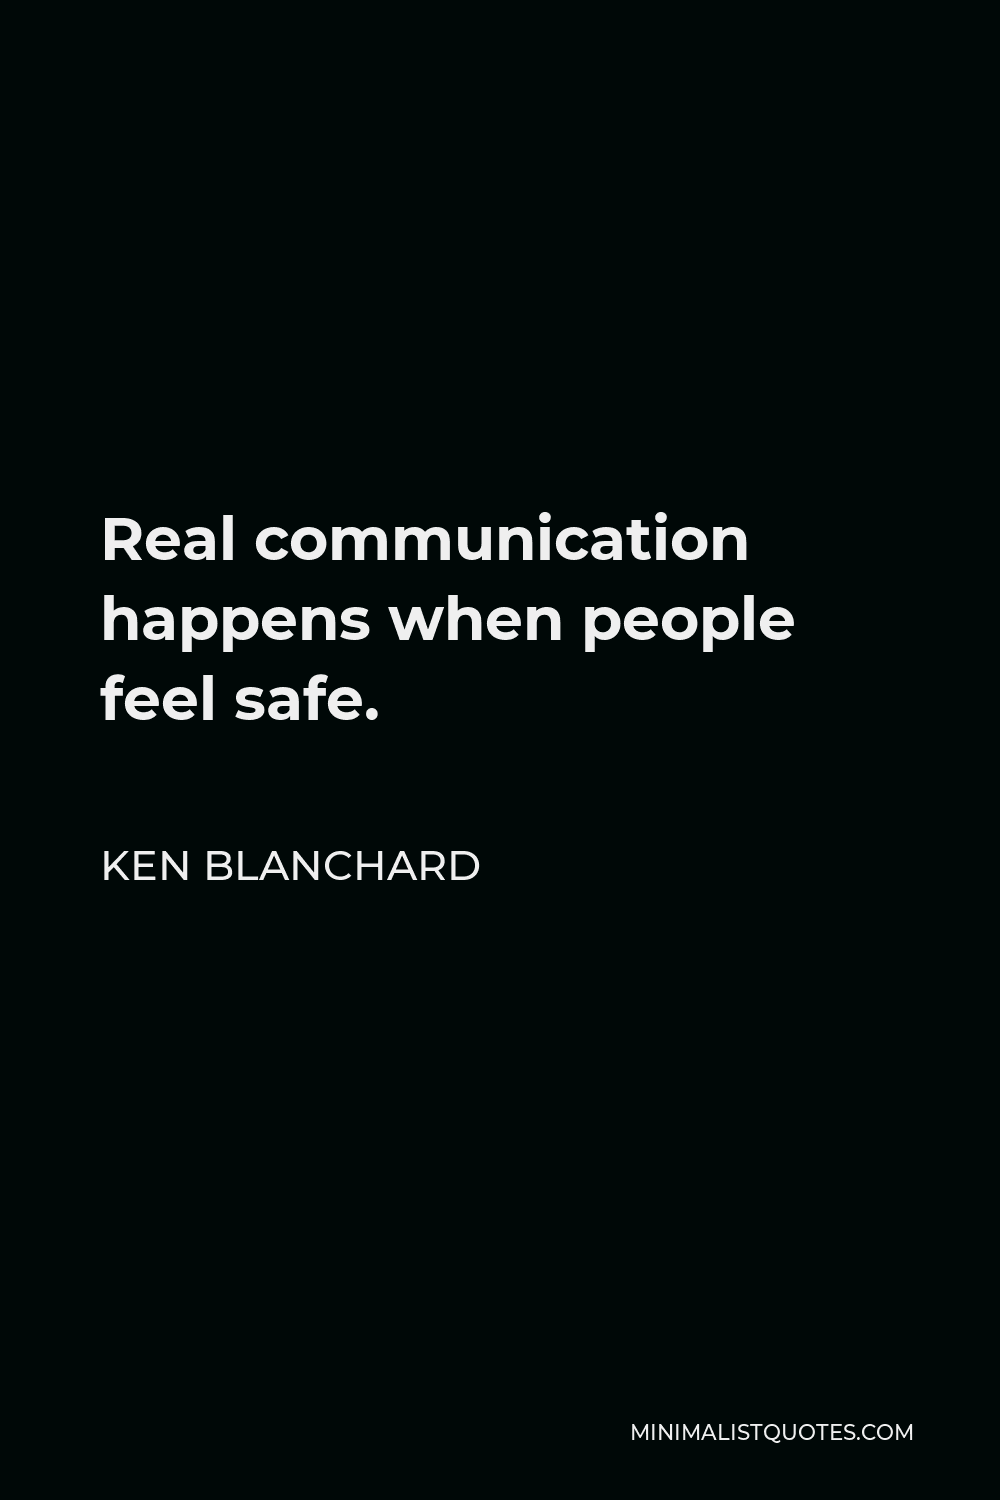 Ken Blanchard Quote - Real communication happens when people feel safe.